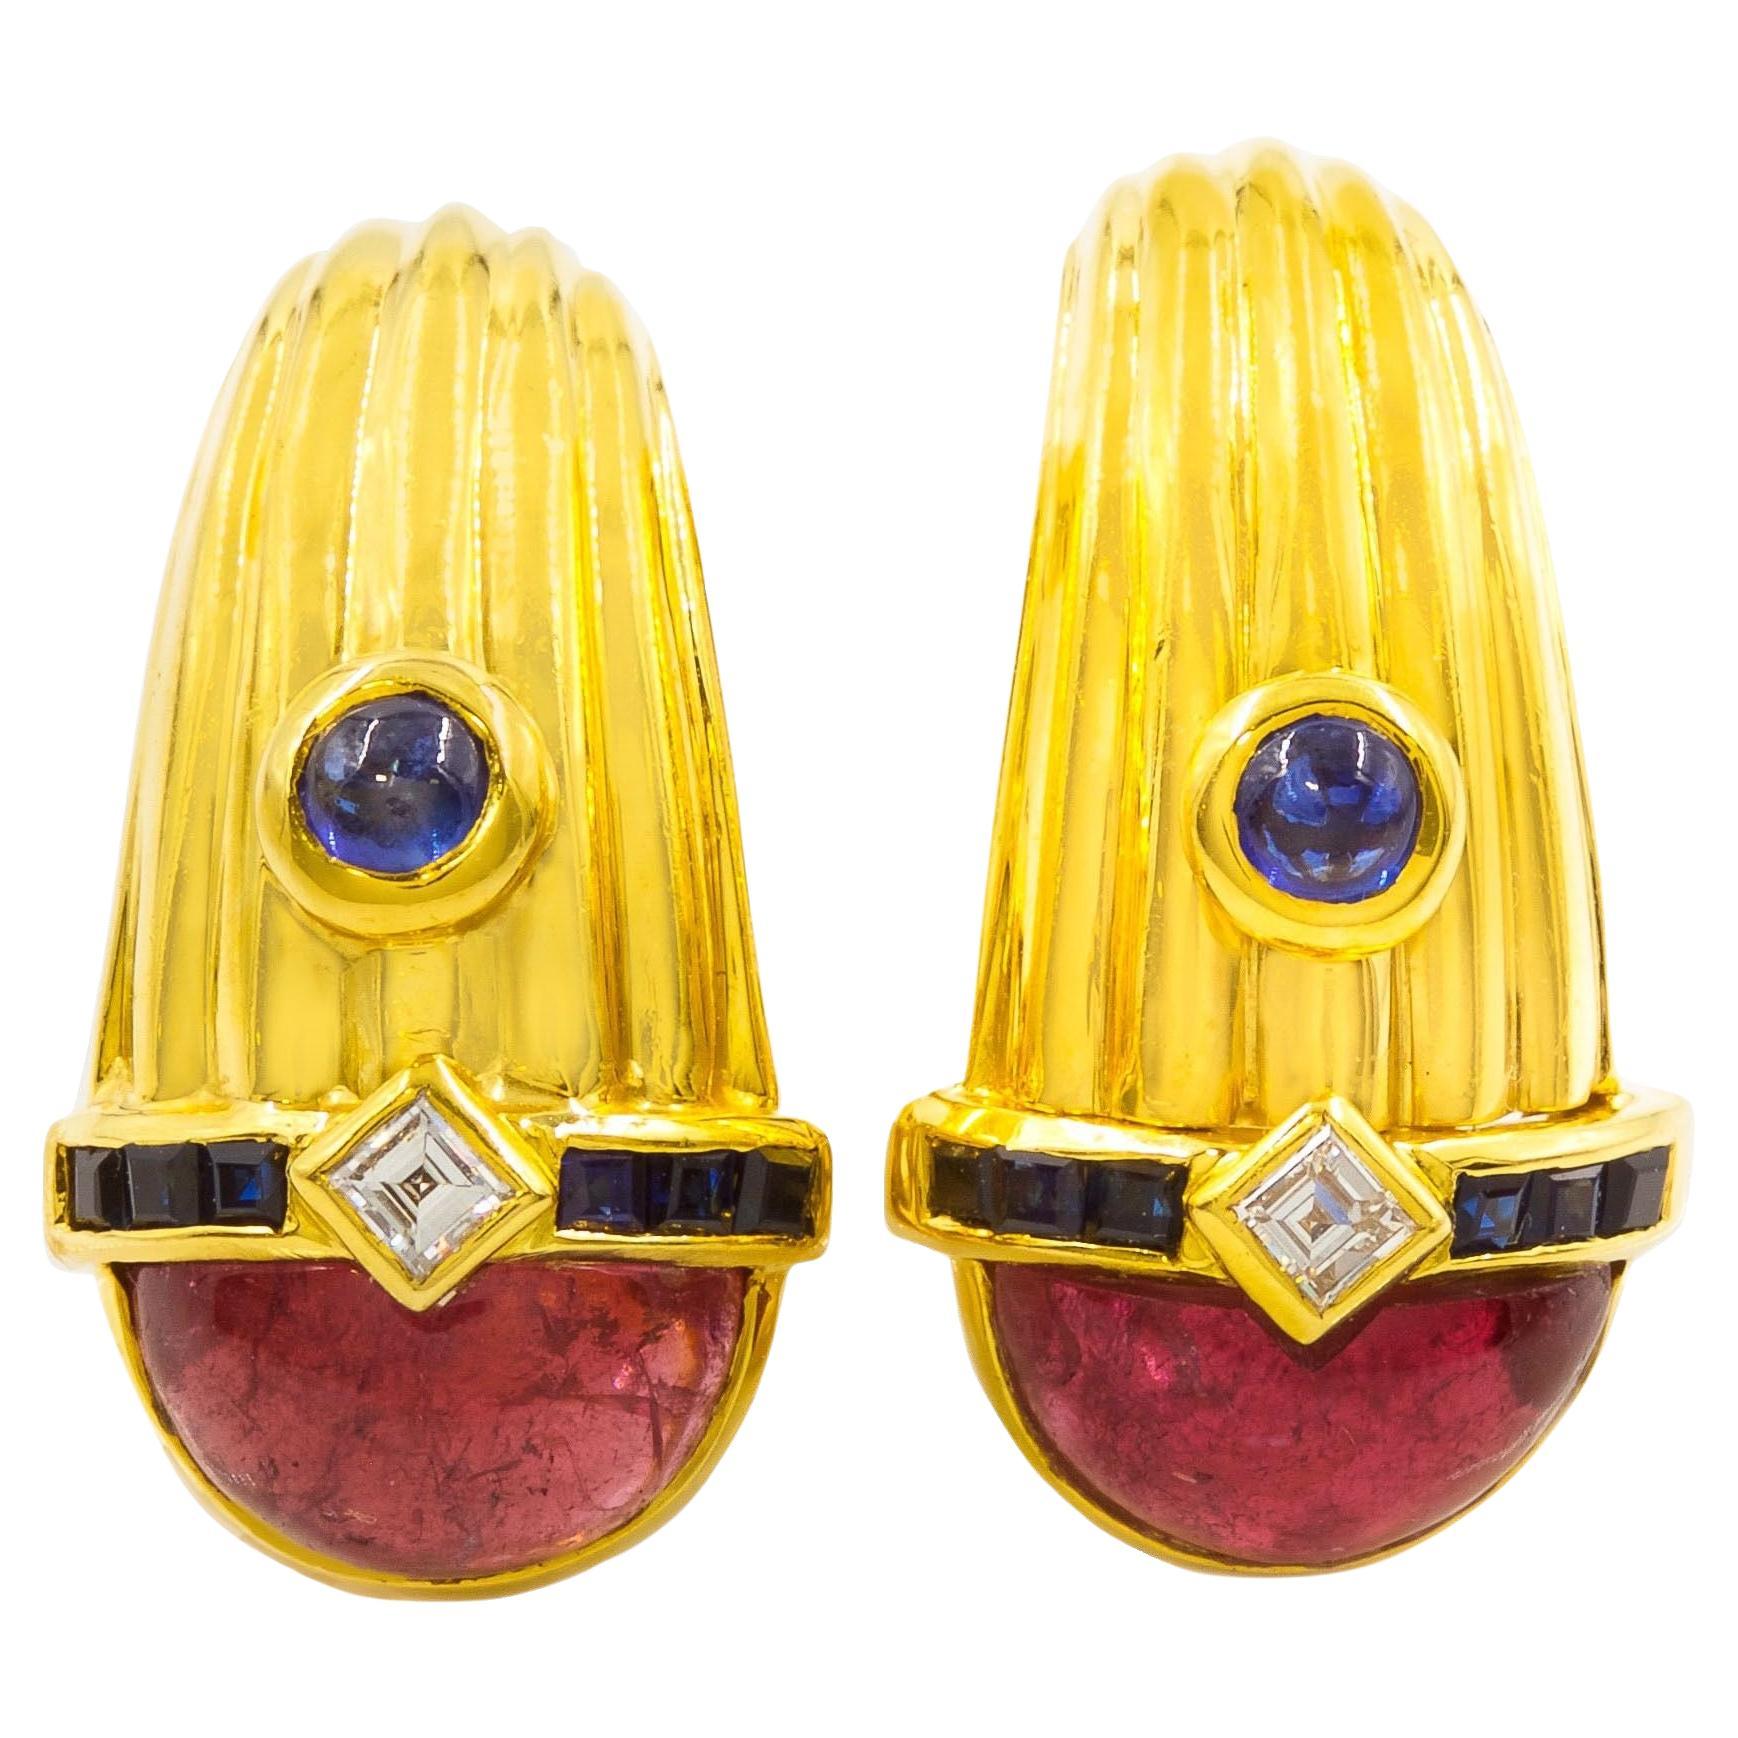 Authentic Italian 18k Gold, Tourmaline and Diamond Earrings by Roberto Legnazzi